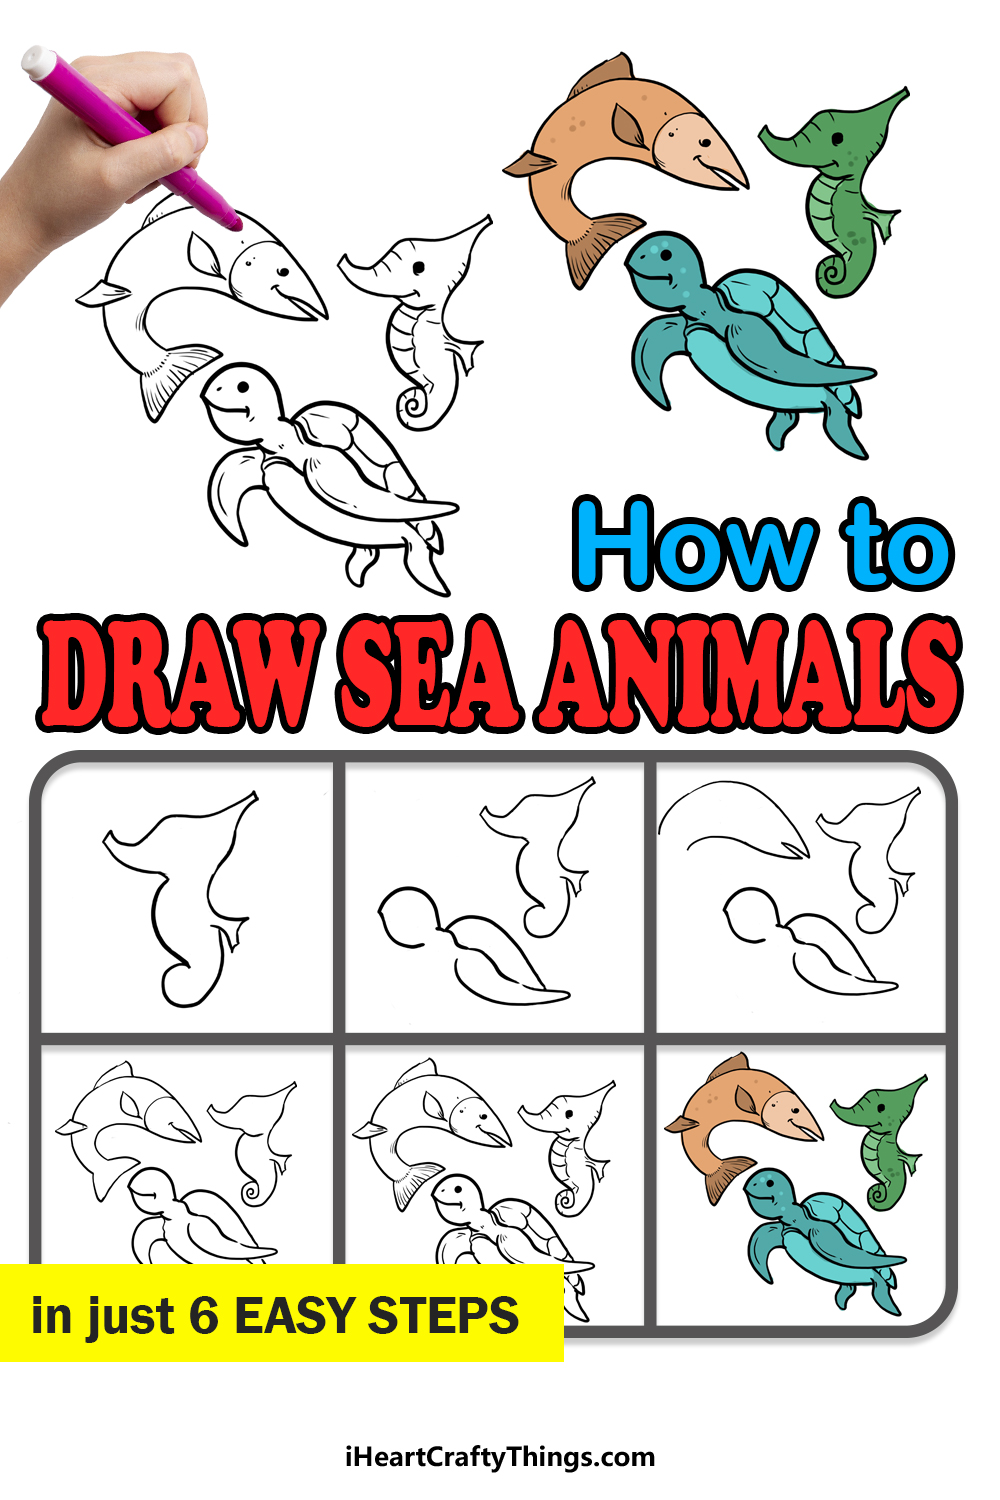 How to Draw Sea Animals step by step guide